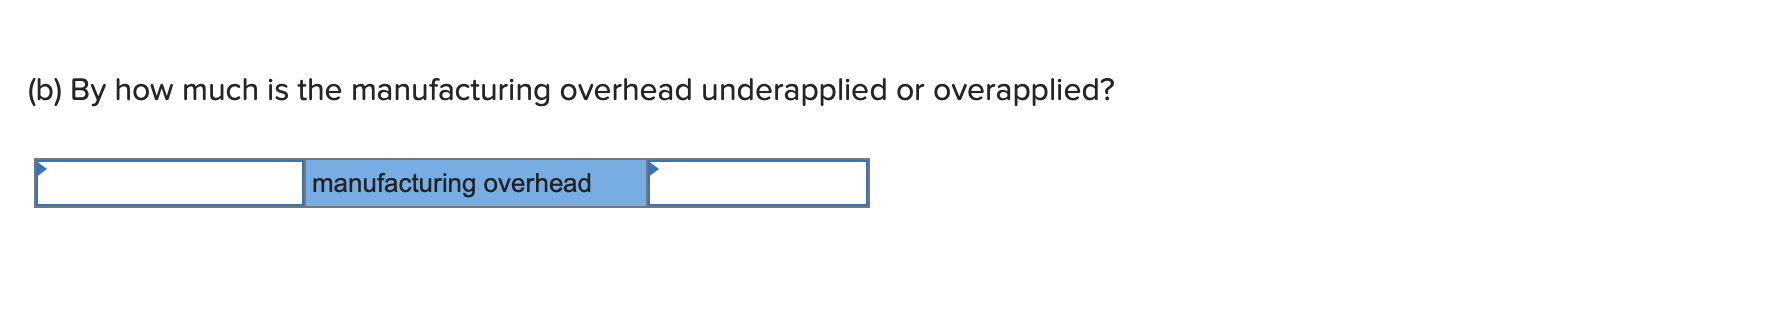 (b) By how much is the manufacturing overhead underapplied or overapplied? manufacturing overhead